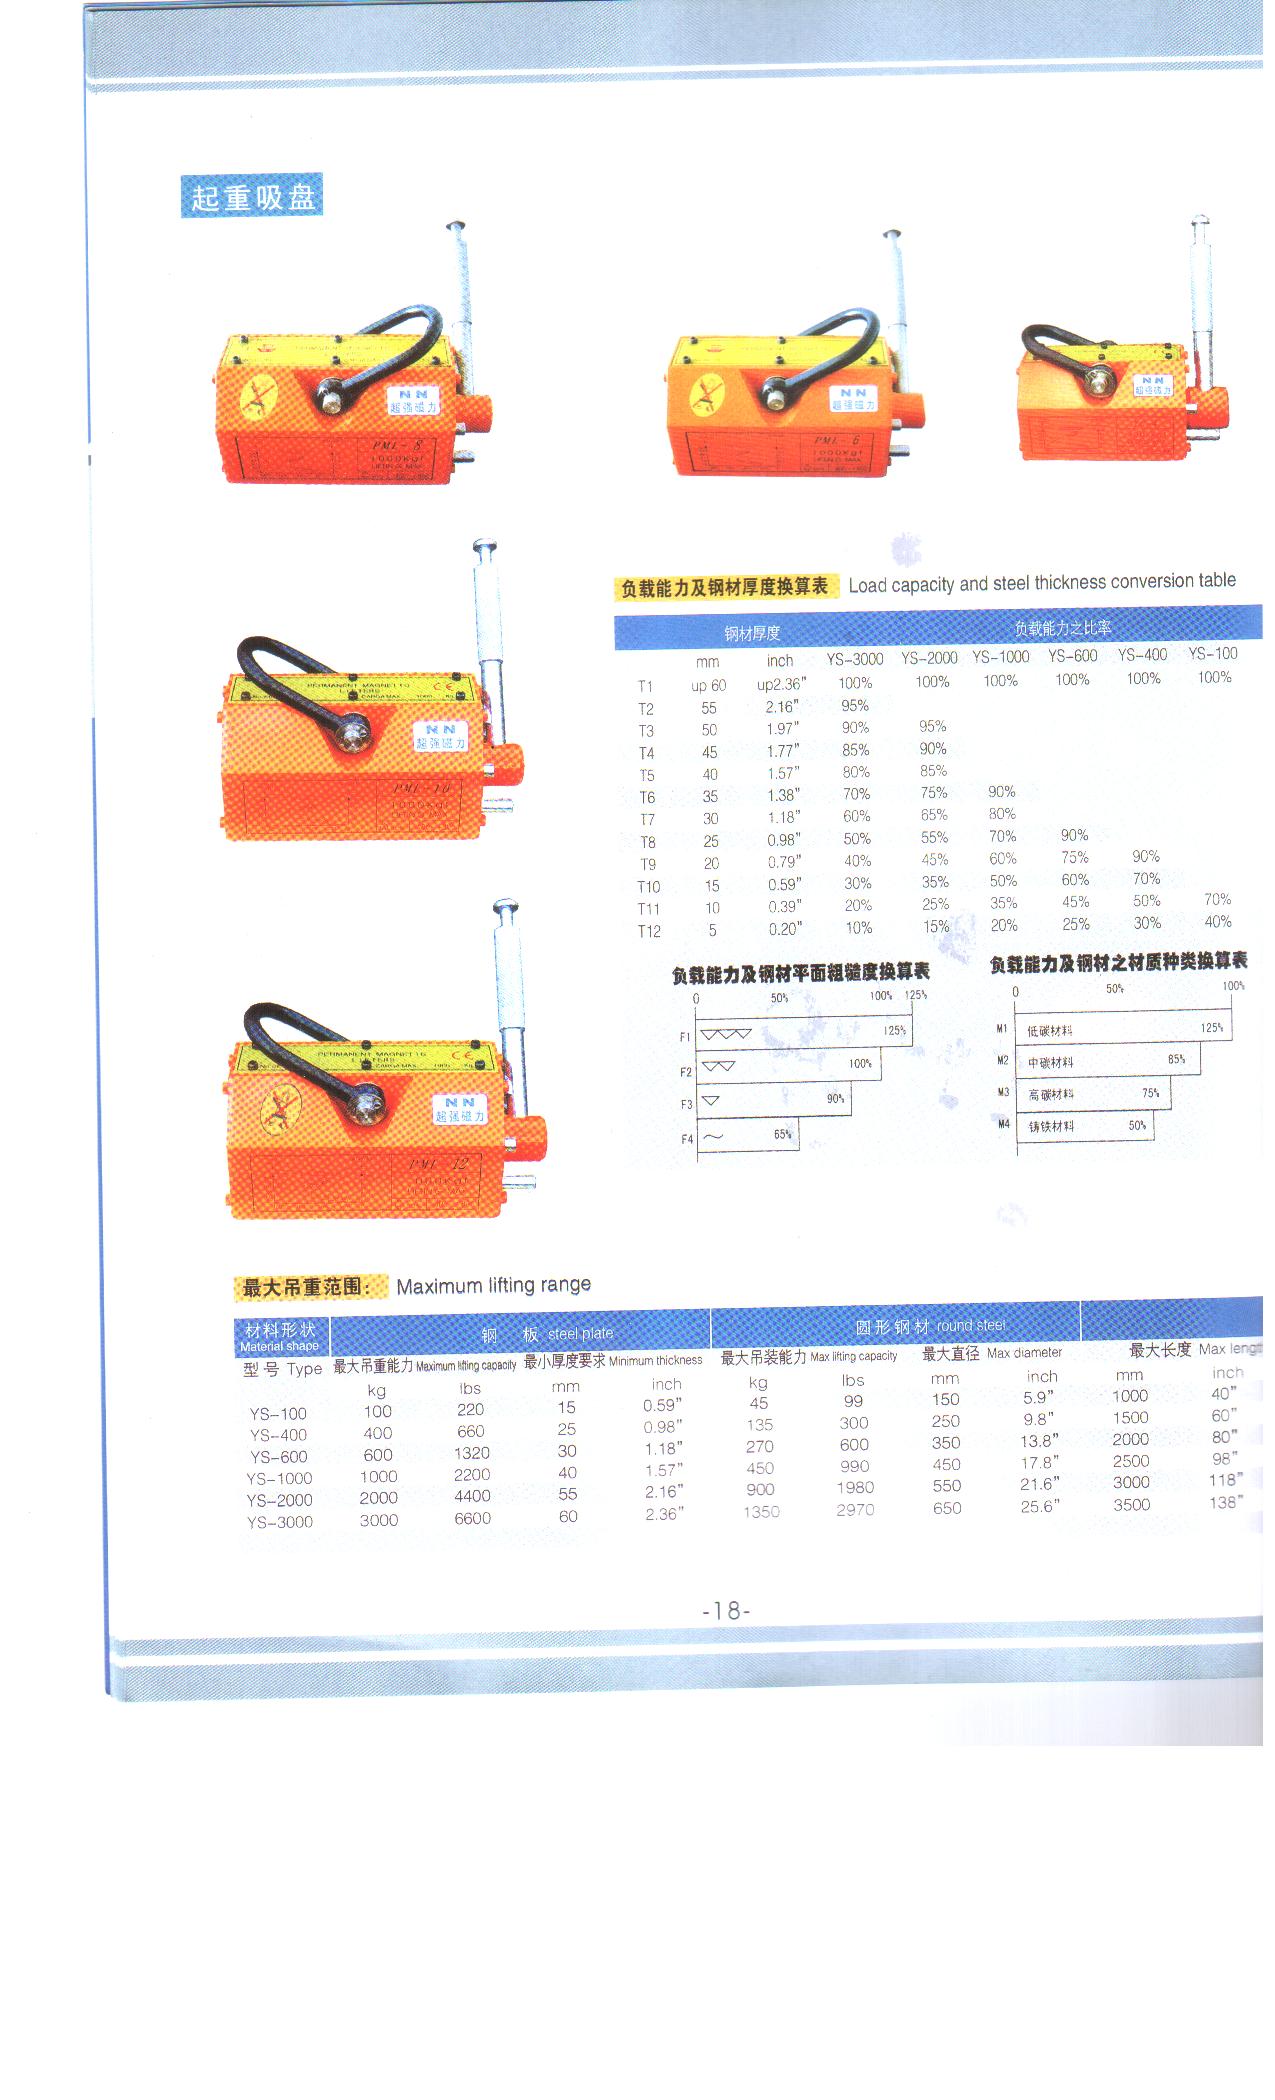 brochure (Lifter Magnet , manual with handle).jpg